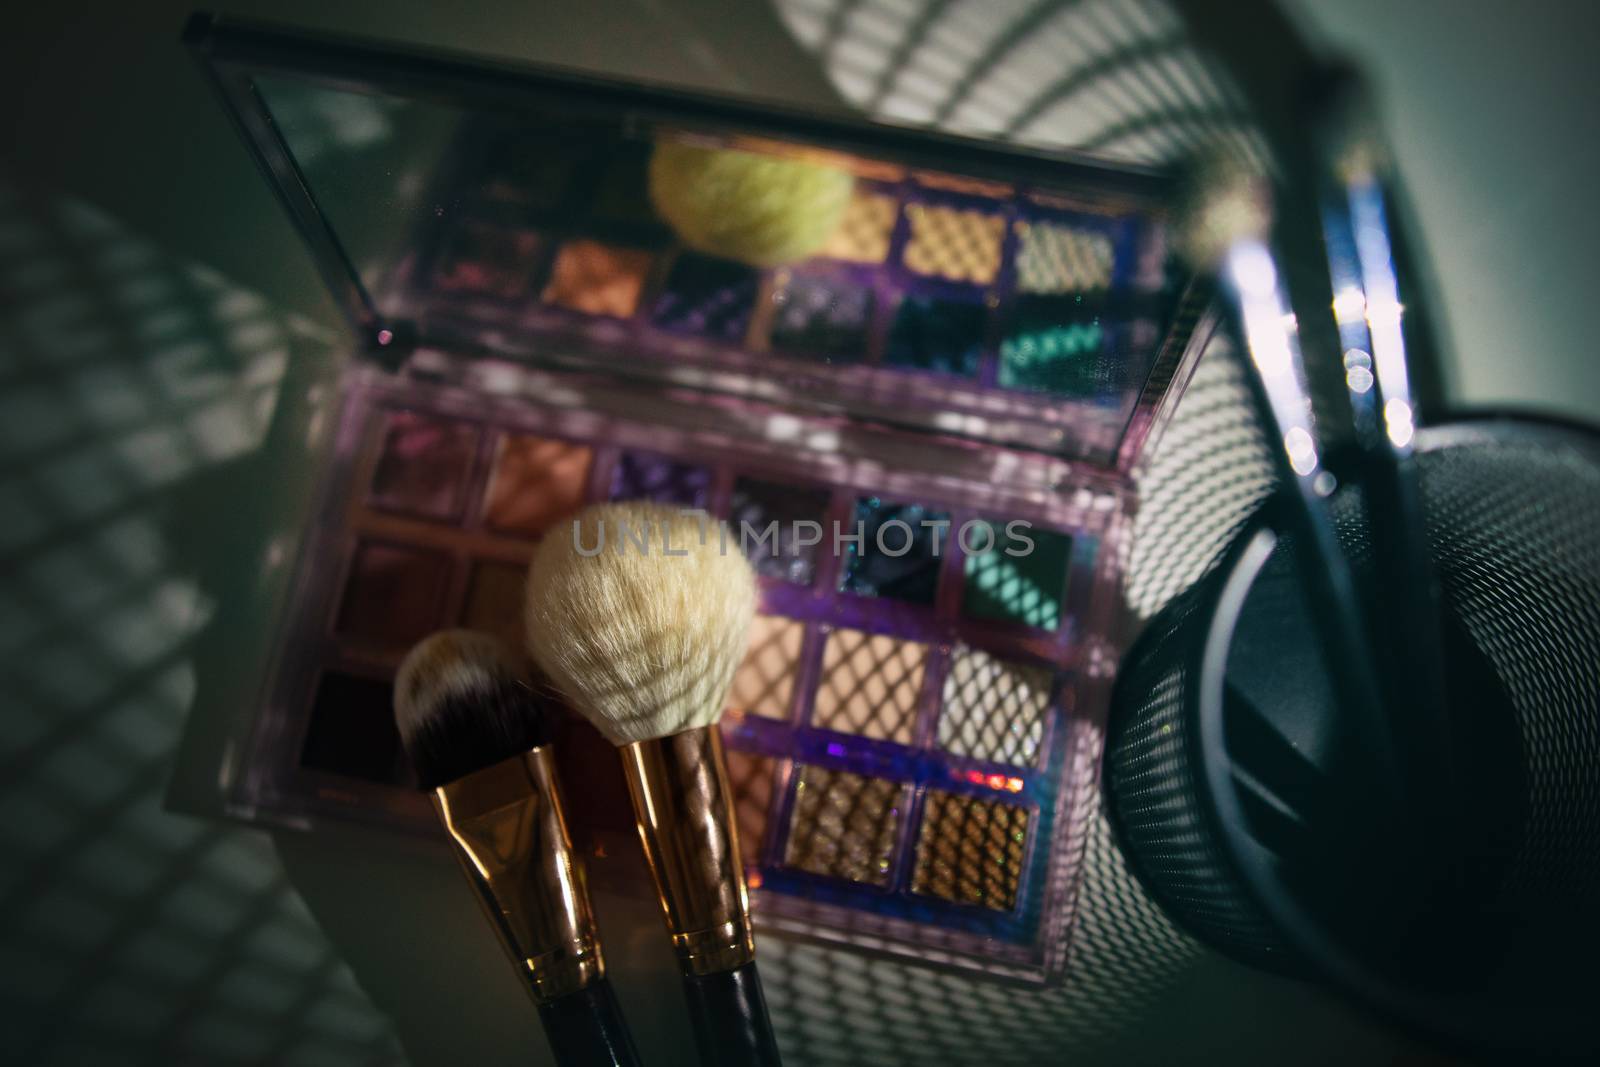 Professional makeup brushes and tools by tadeush89